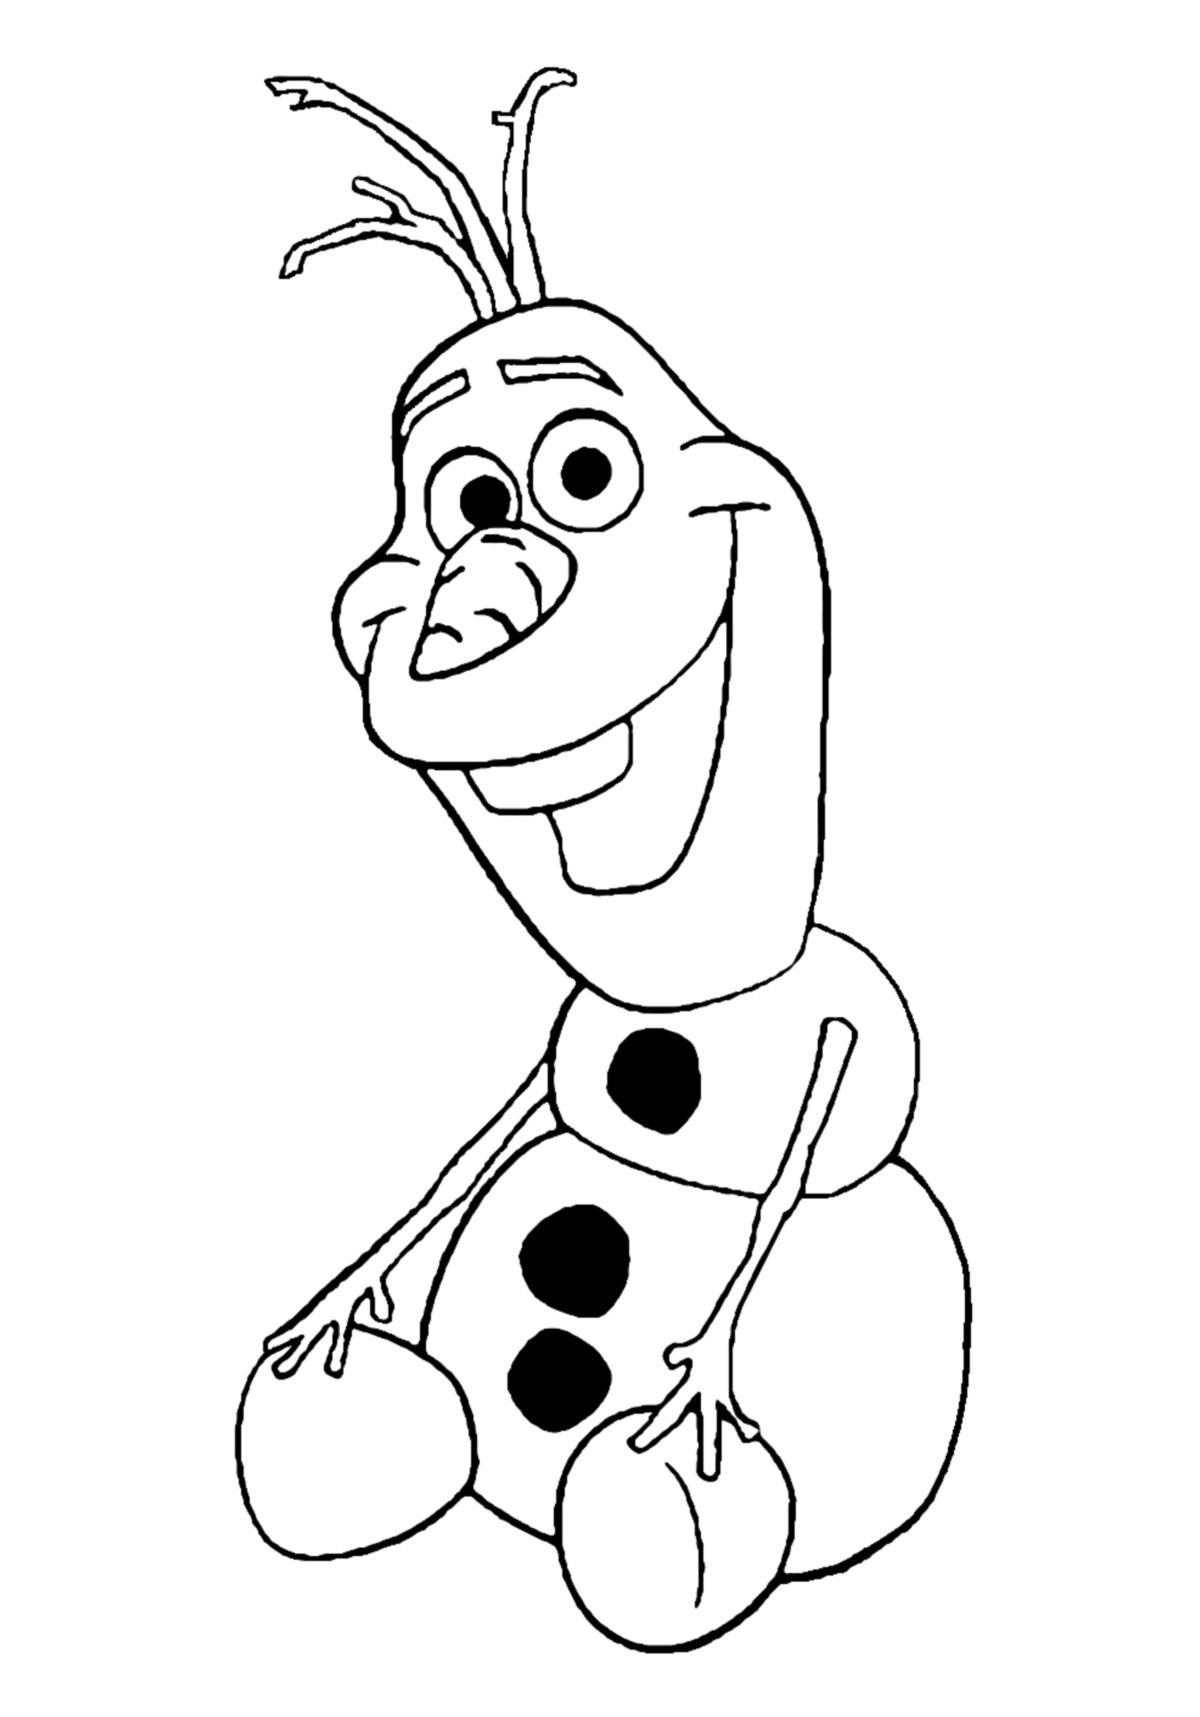 Cute free Frozen coloring page to download : Olaf smiling